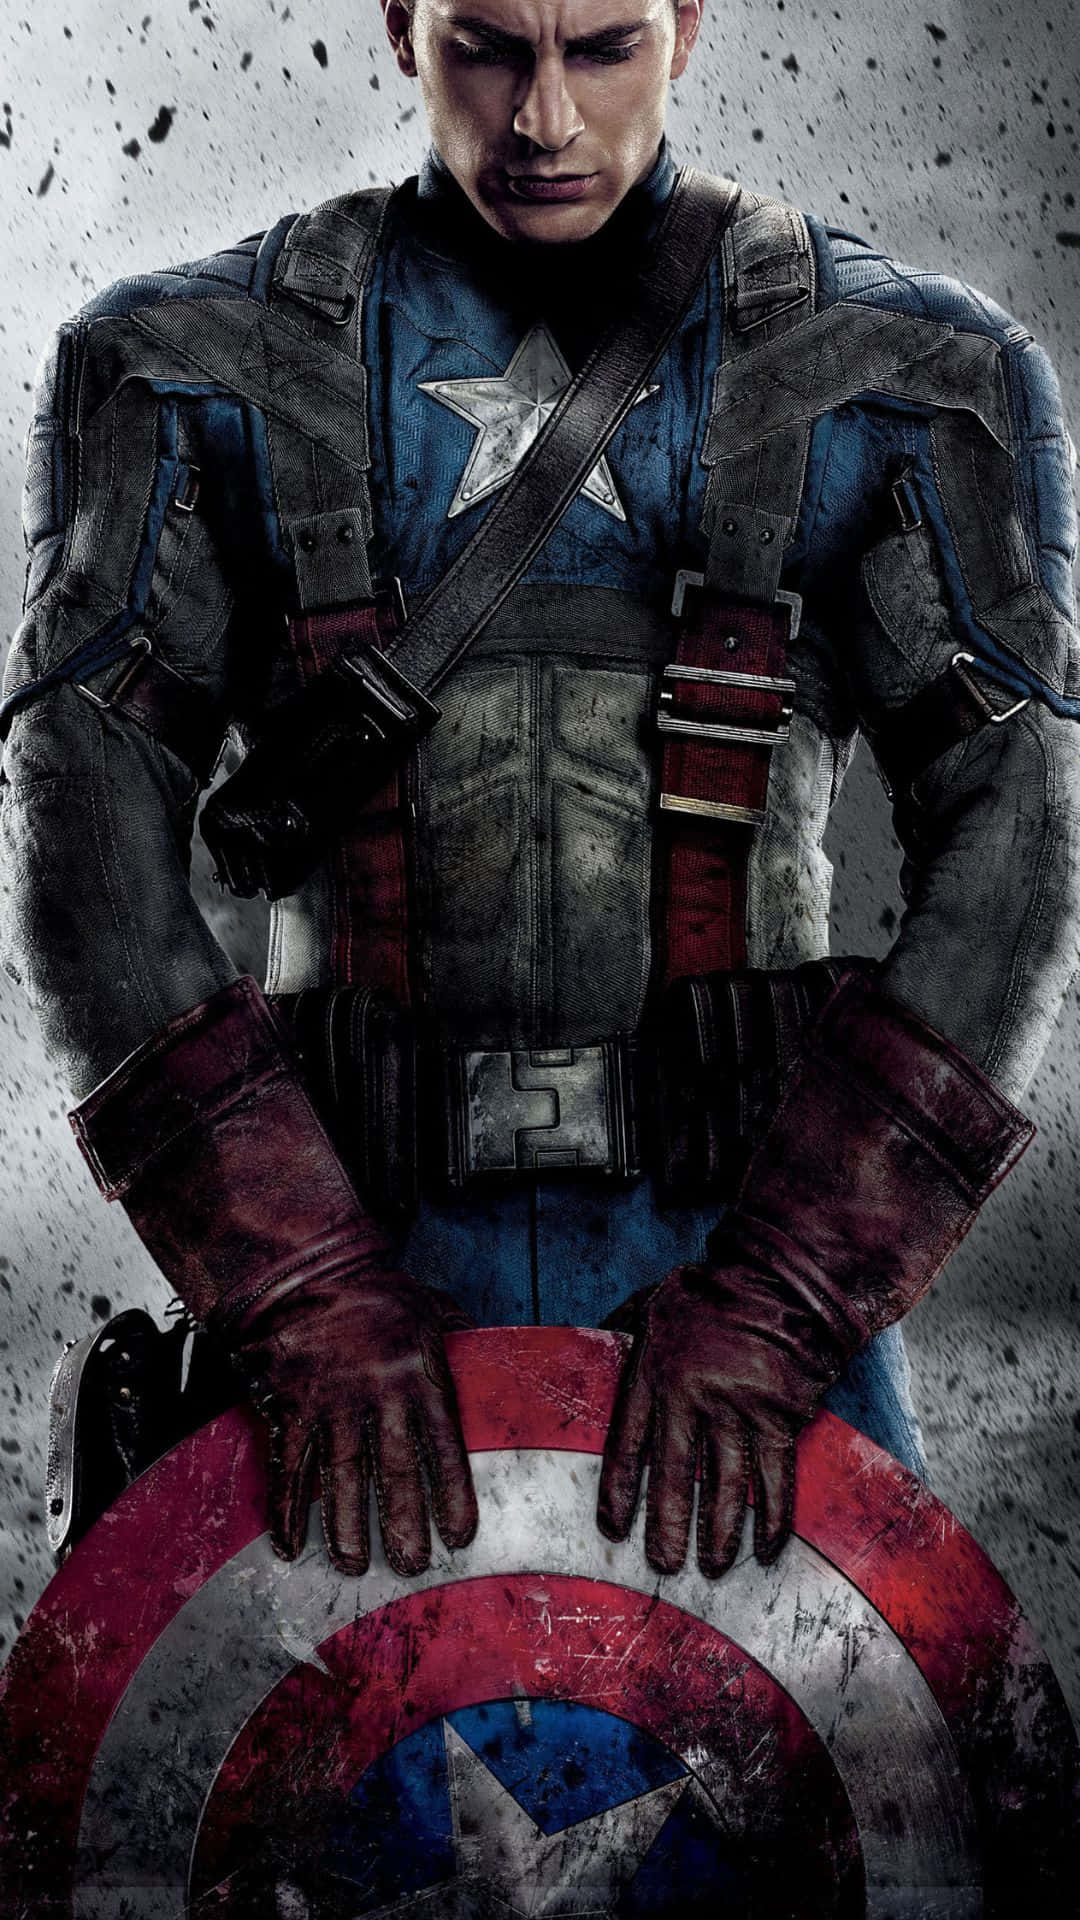 Android Marvel's Avengers Captain America Holding His Shield Down Background